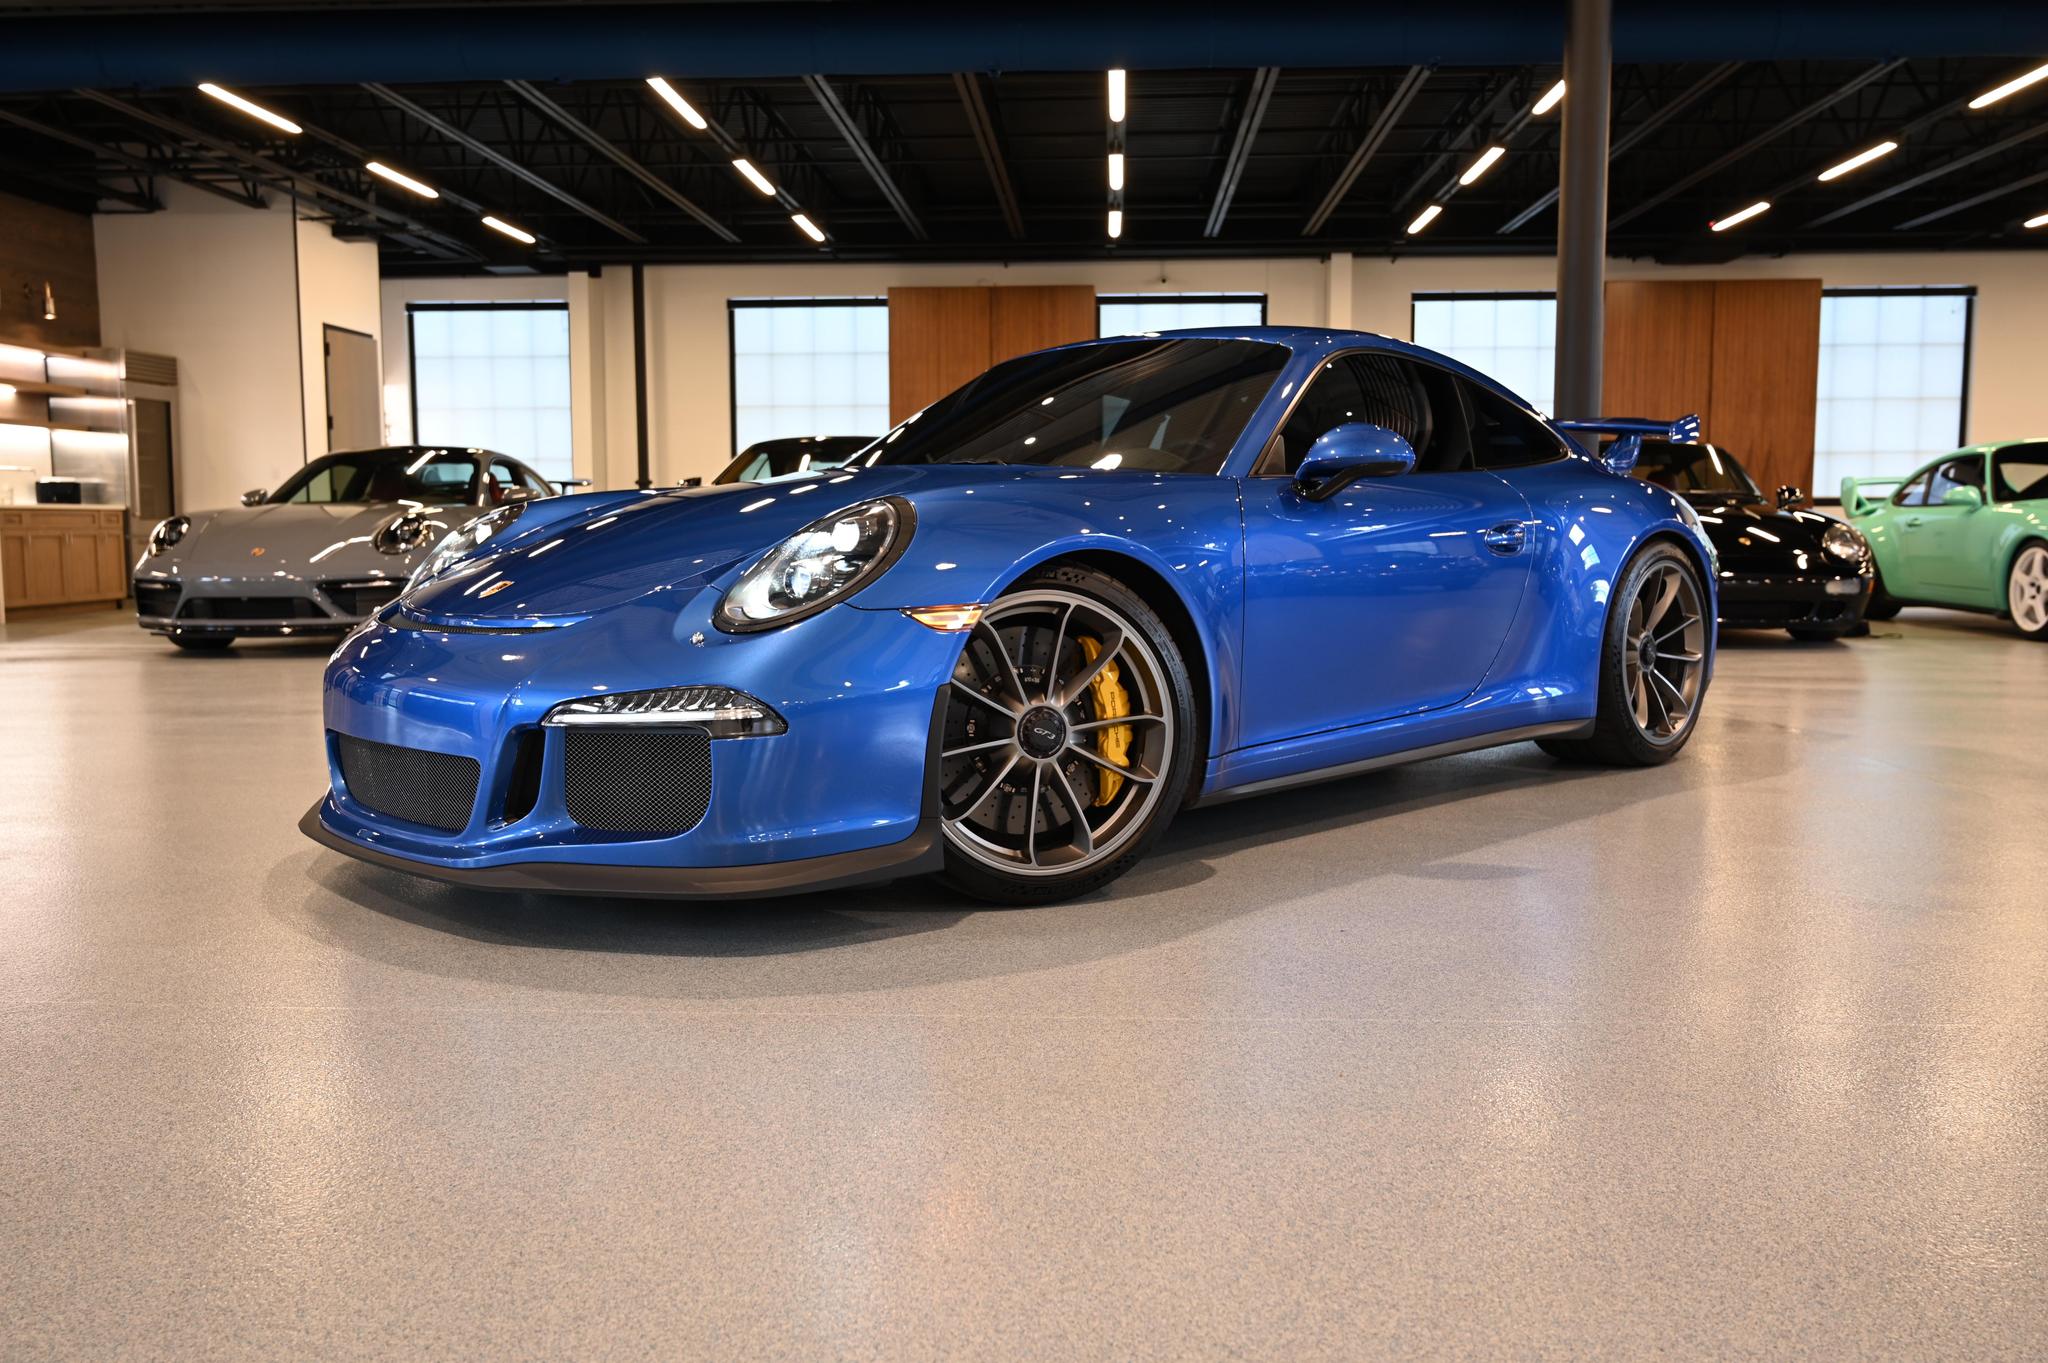 Priced at $162,991, this 2016 Porsche 911 GT3 reflects its exceptional condition, sparsity, and peerless craftsmanship.